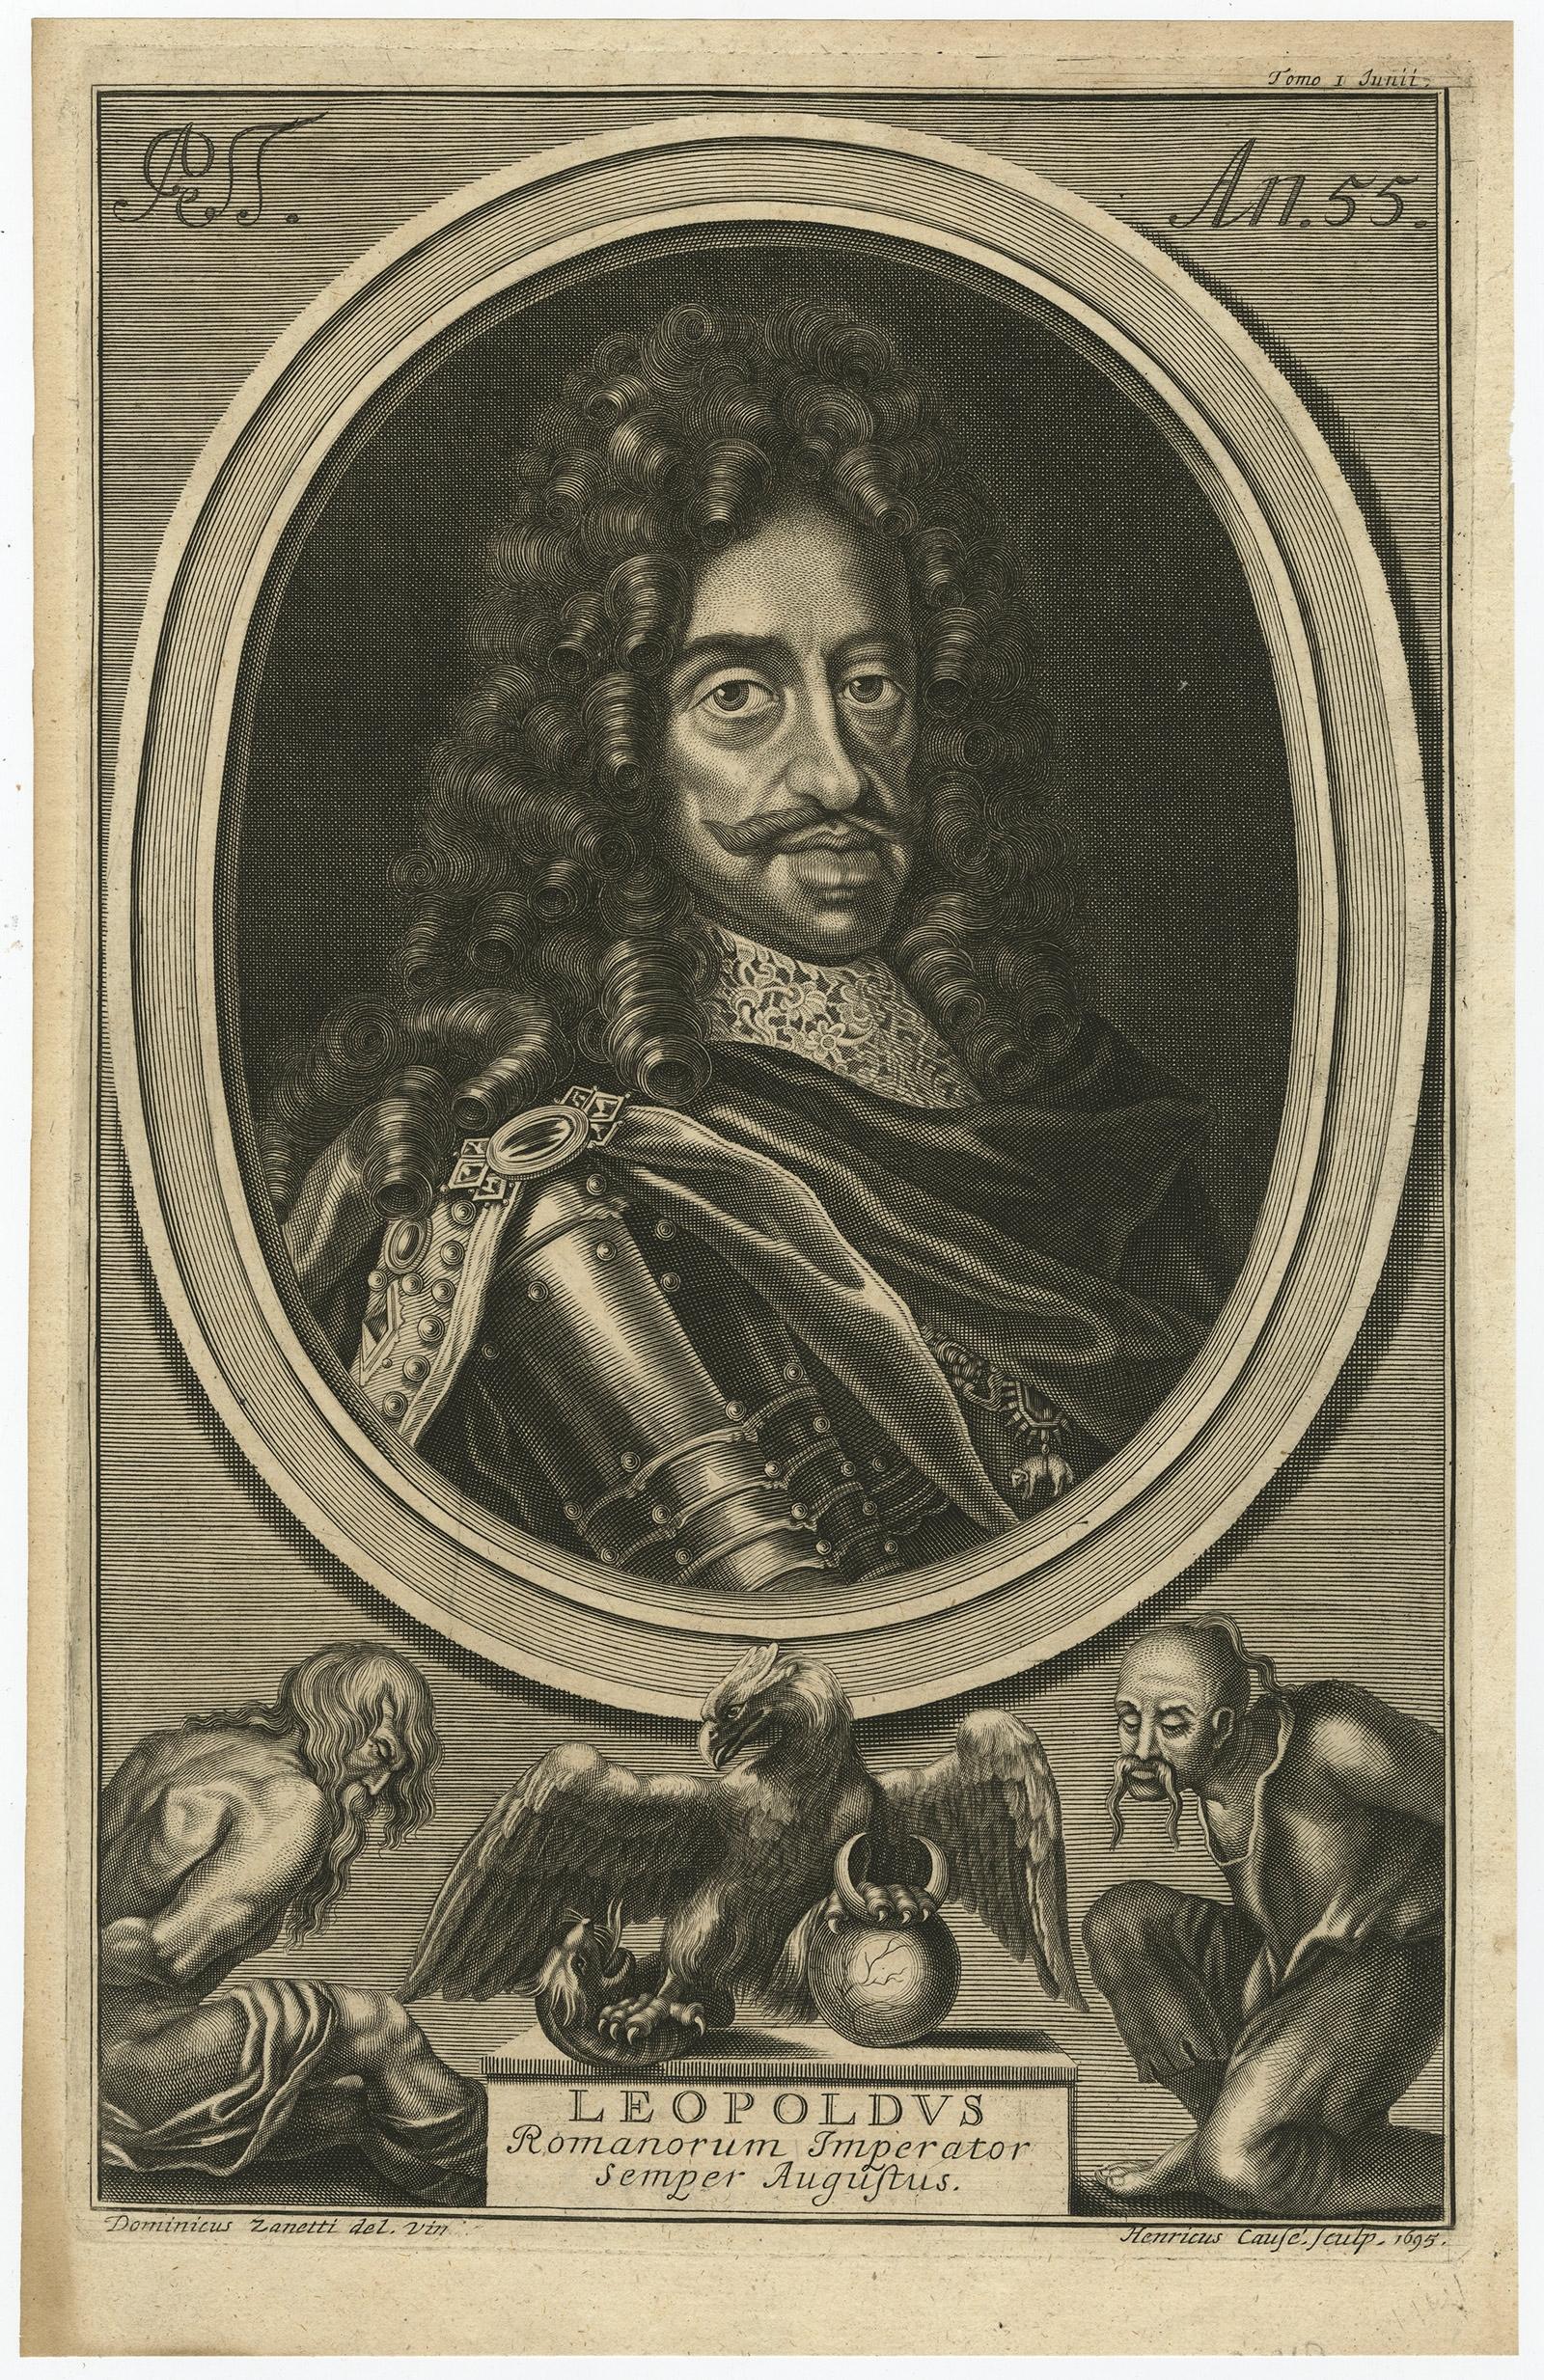 Antique print, titled: 'Leopoldus Romanorum Imperator Semper Augustus.' 

This original antique plate shows a portrait of Leopold I (9 June 1640 – 5 May 1705), he was Holy Roman Emperor, King of Hungary, Croatia, and Bohemia. Source unknown, to be